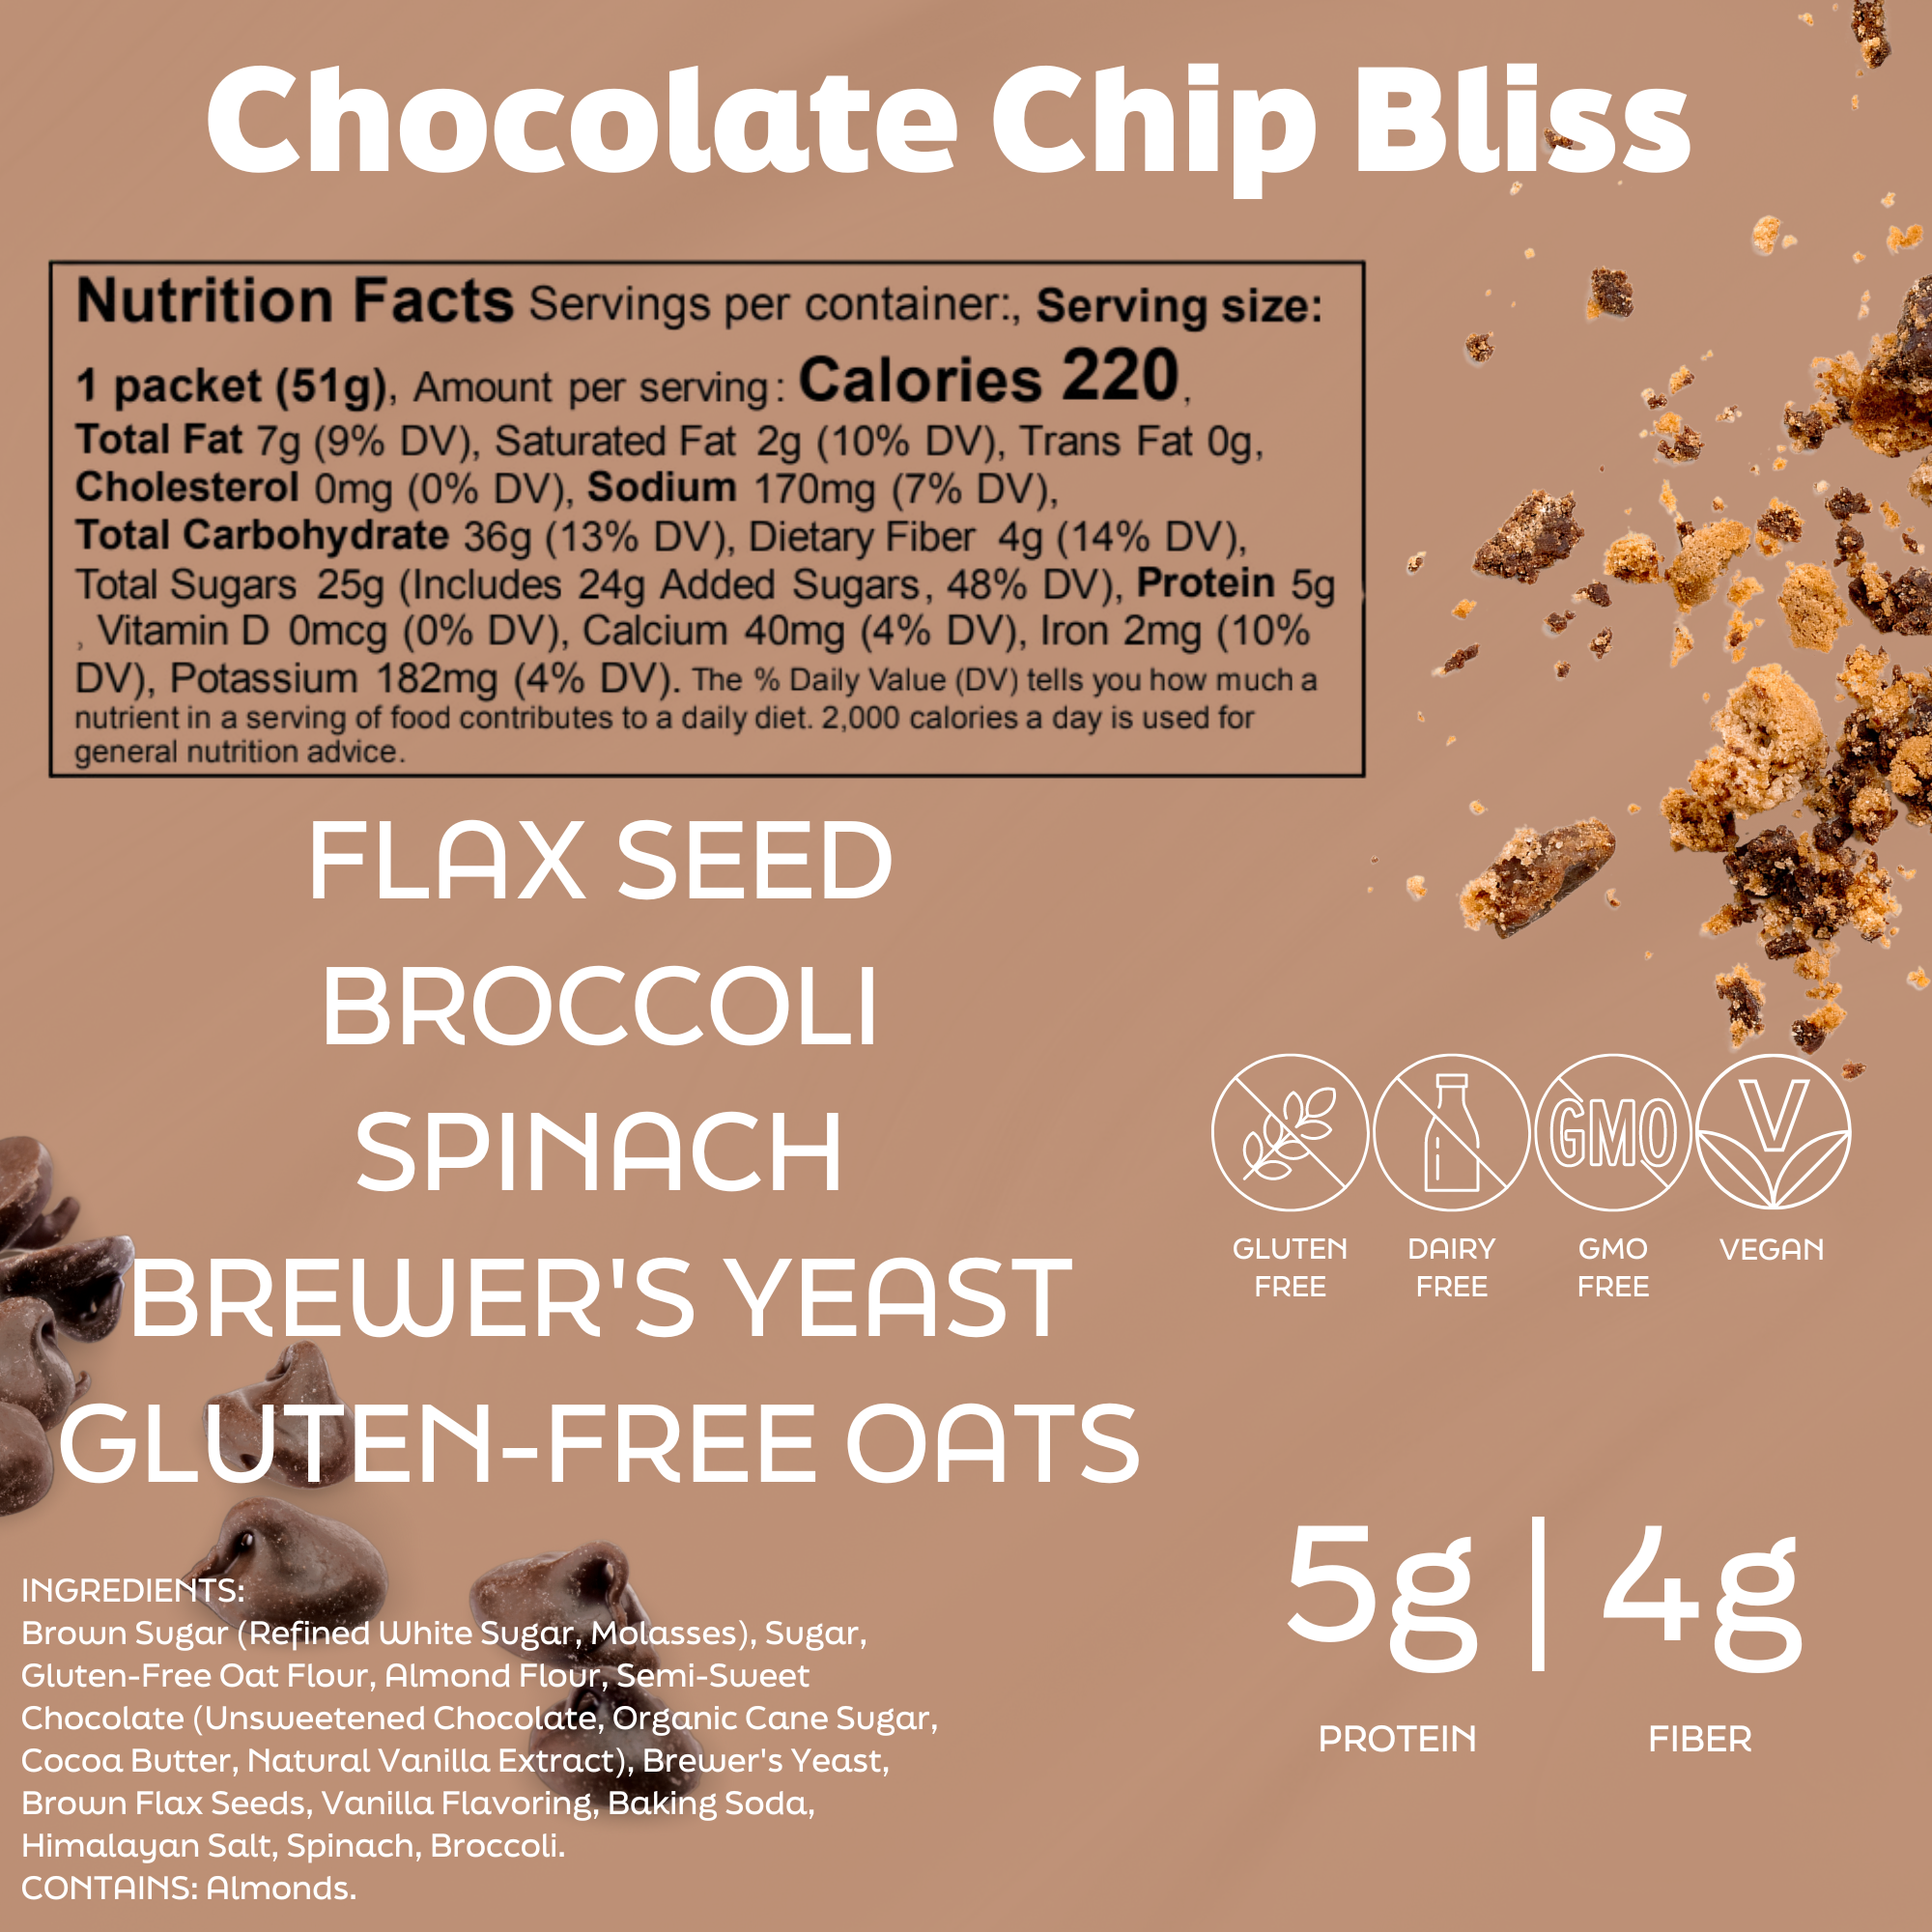 Chocolate Chip Bliss Lactation Cookie